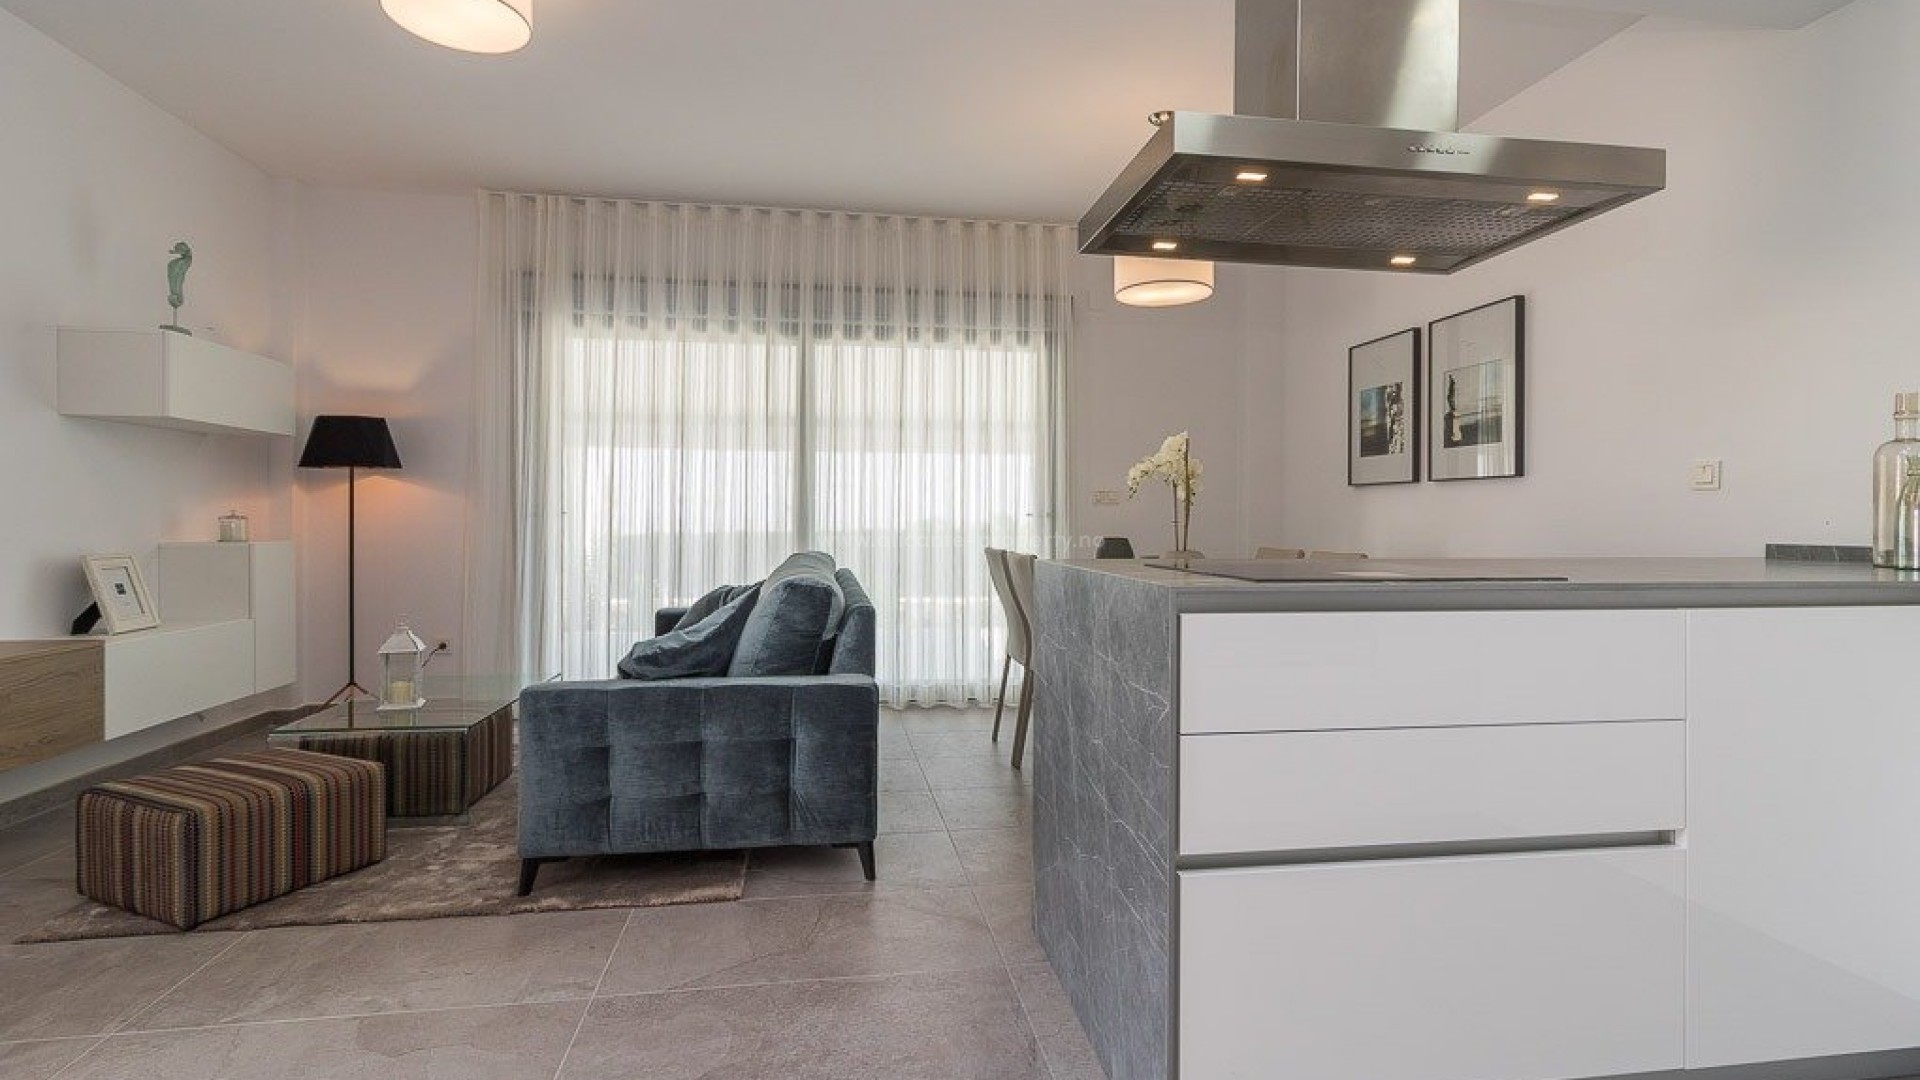 Exclusive residential complex with bungalows at Los Balcones (Torrevieja) with nice views Close to the famous beaches of Torrevieja and Orihuela Costa